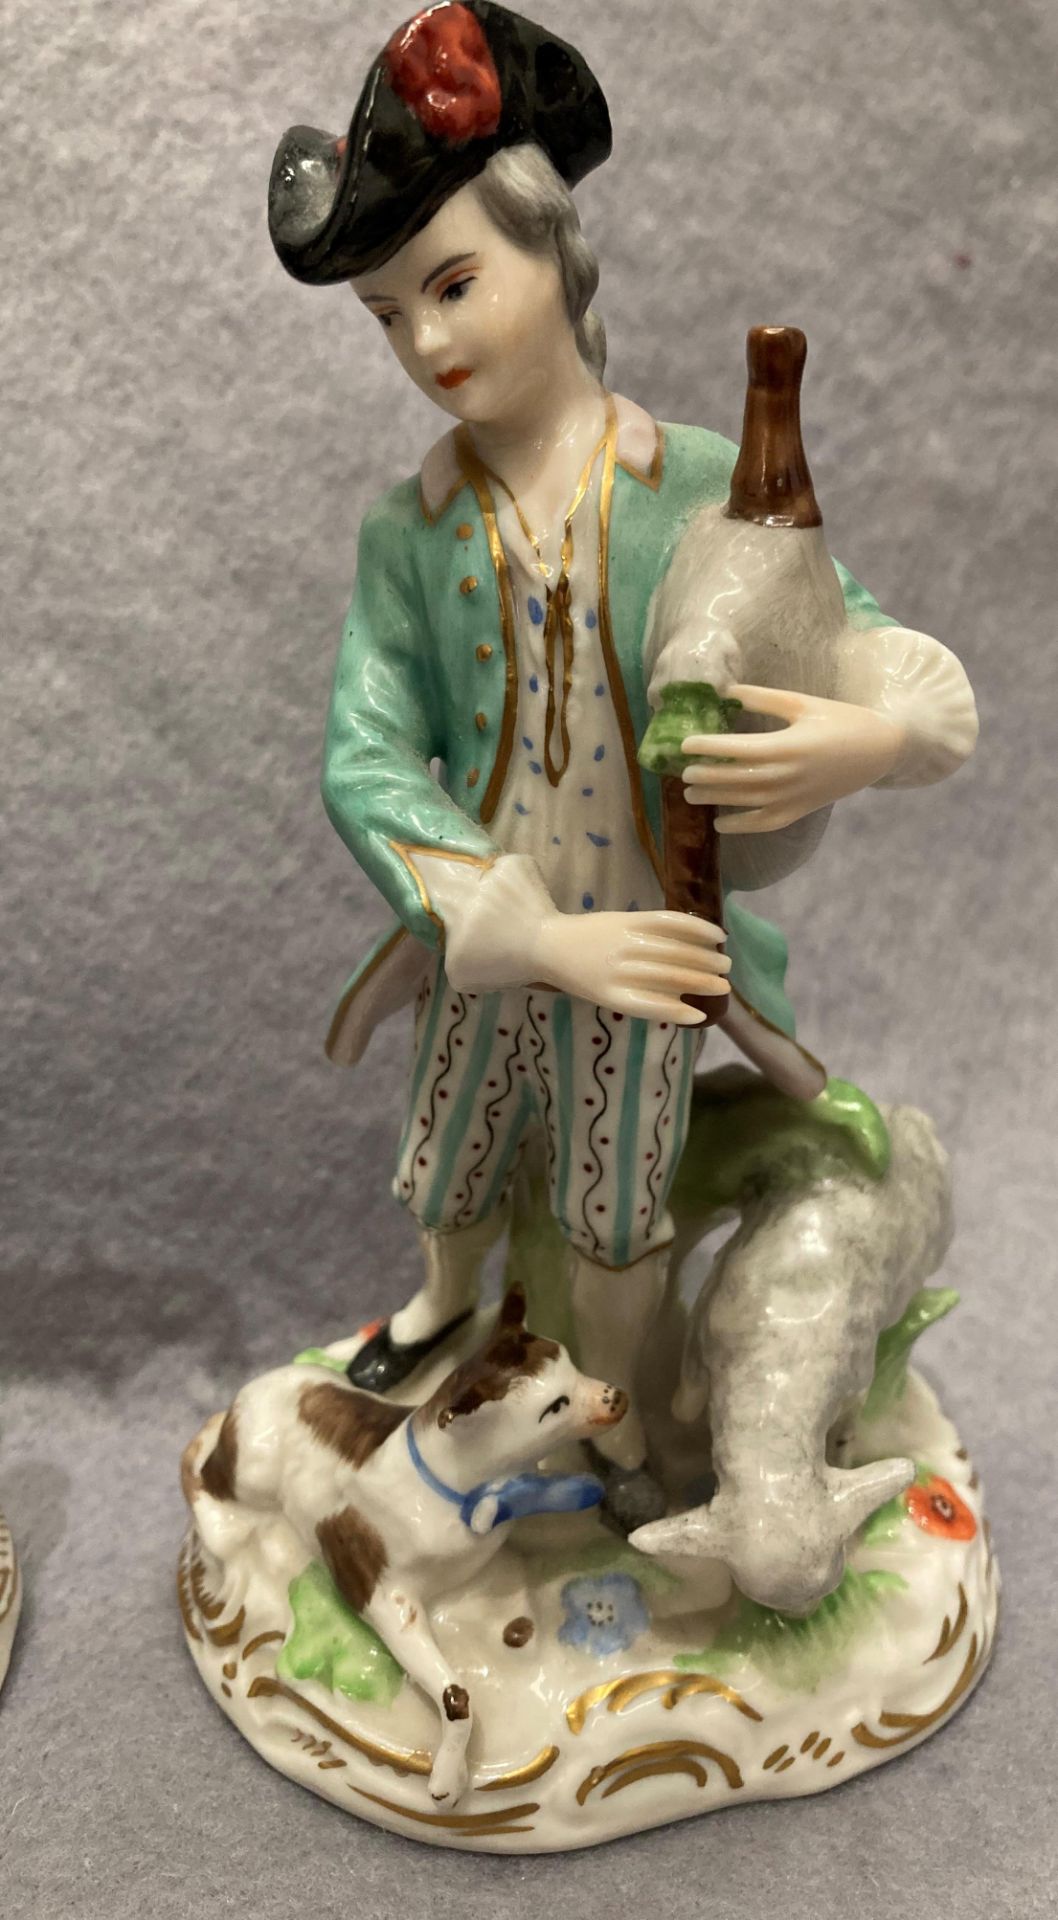 Pair of porcelain figurines, man and woman with animals, damage to the man's animal with bow, - Image 3 of 6